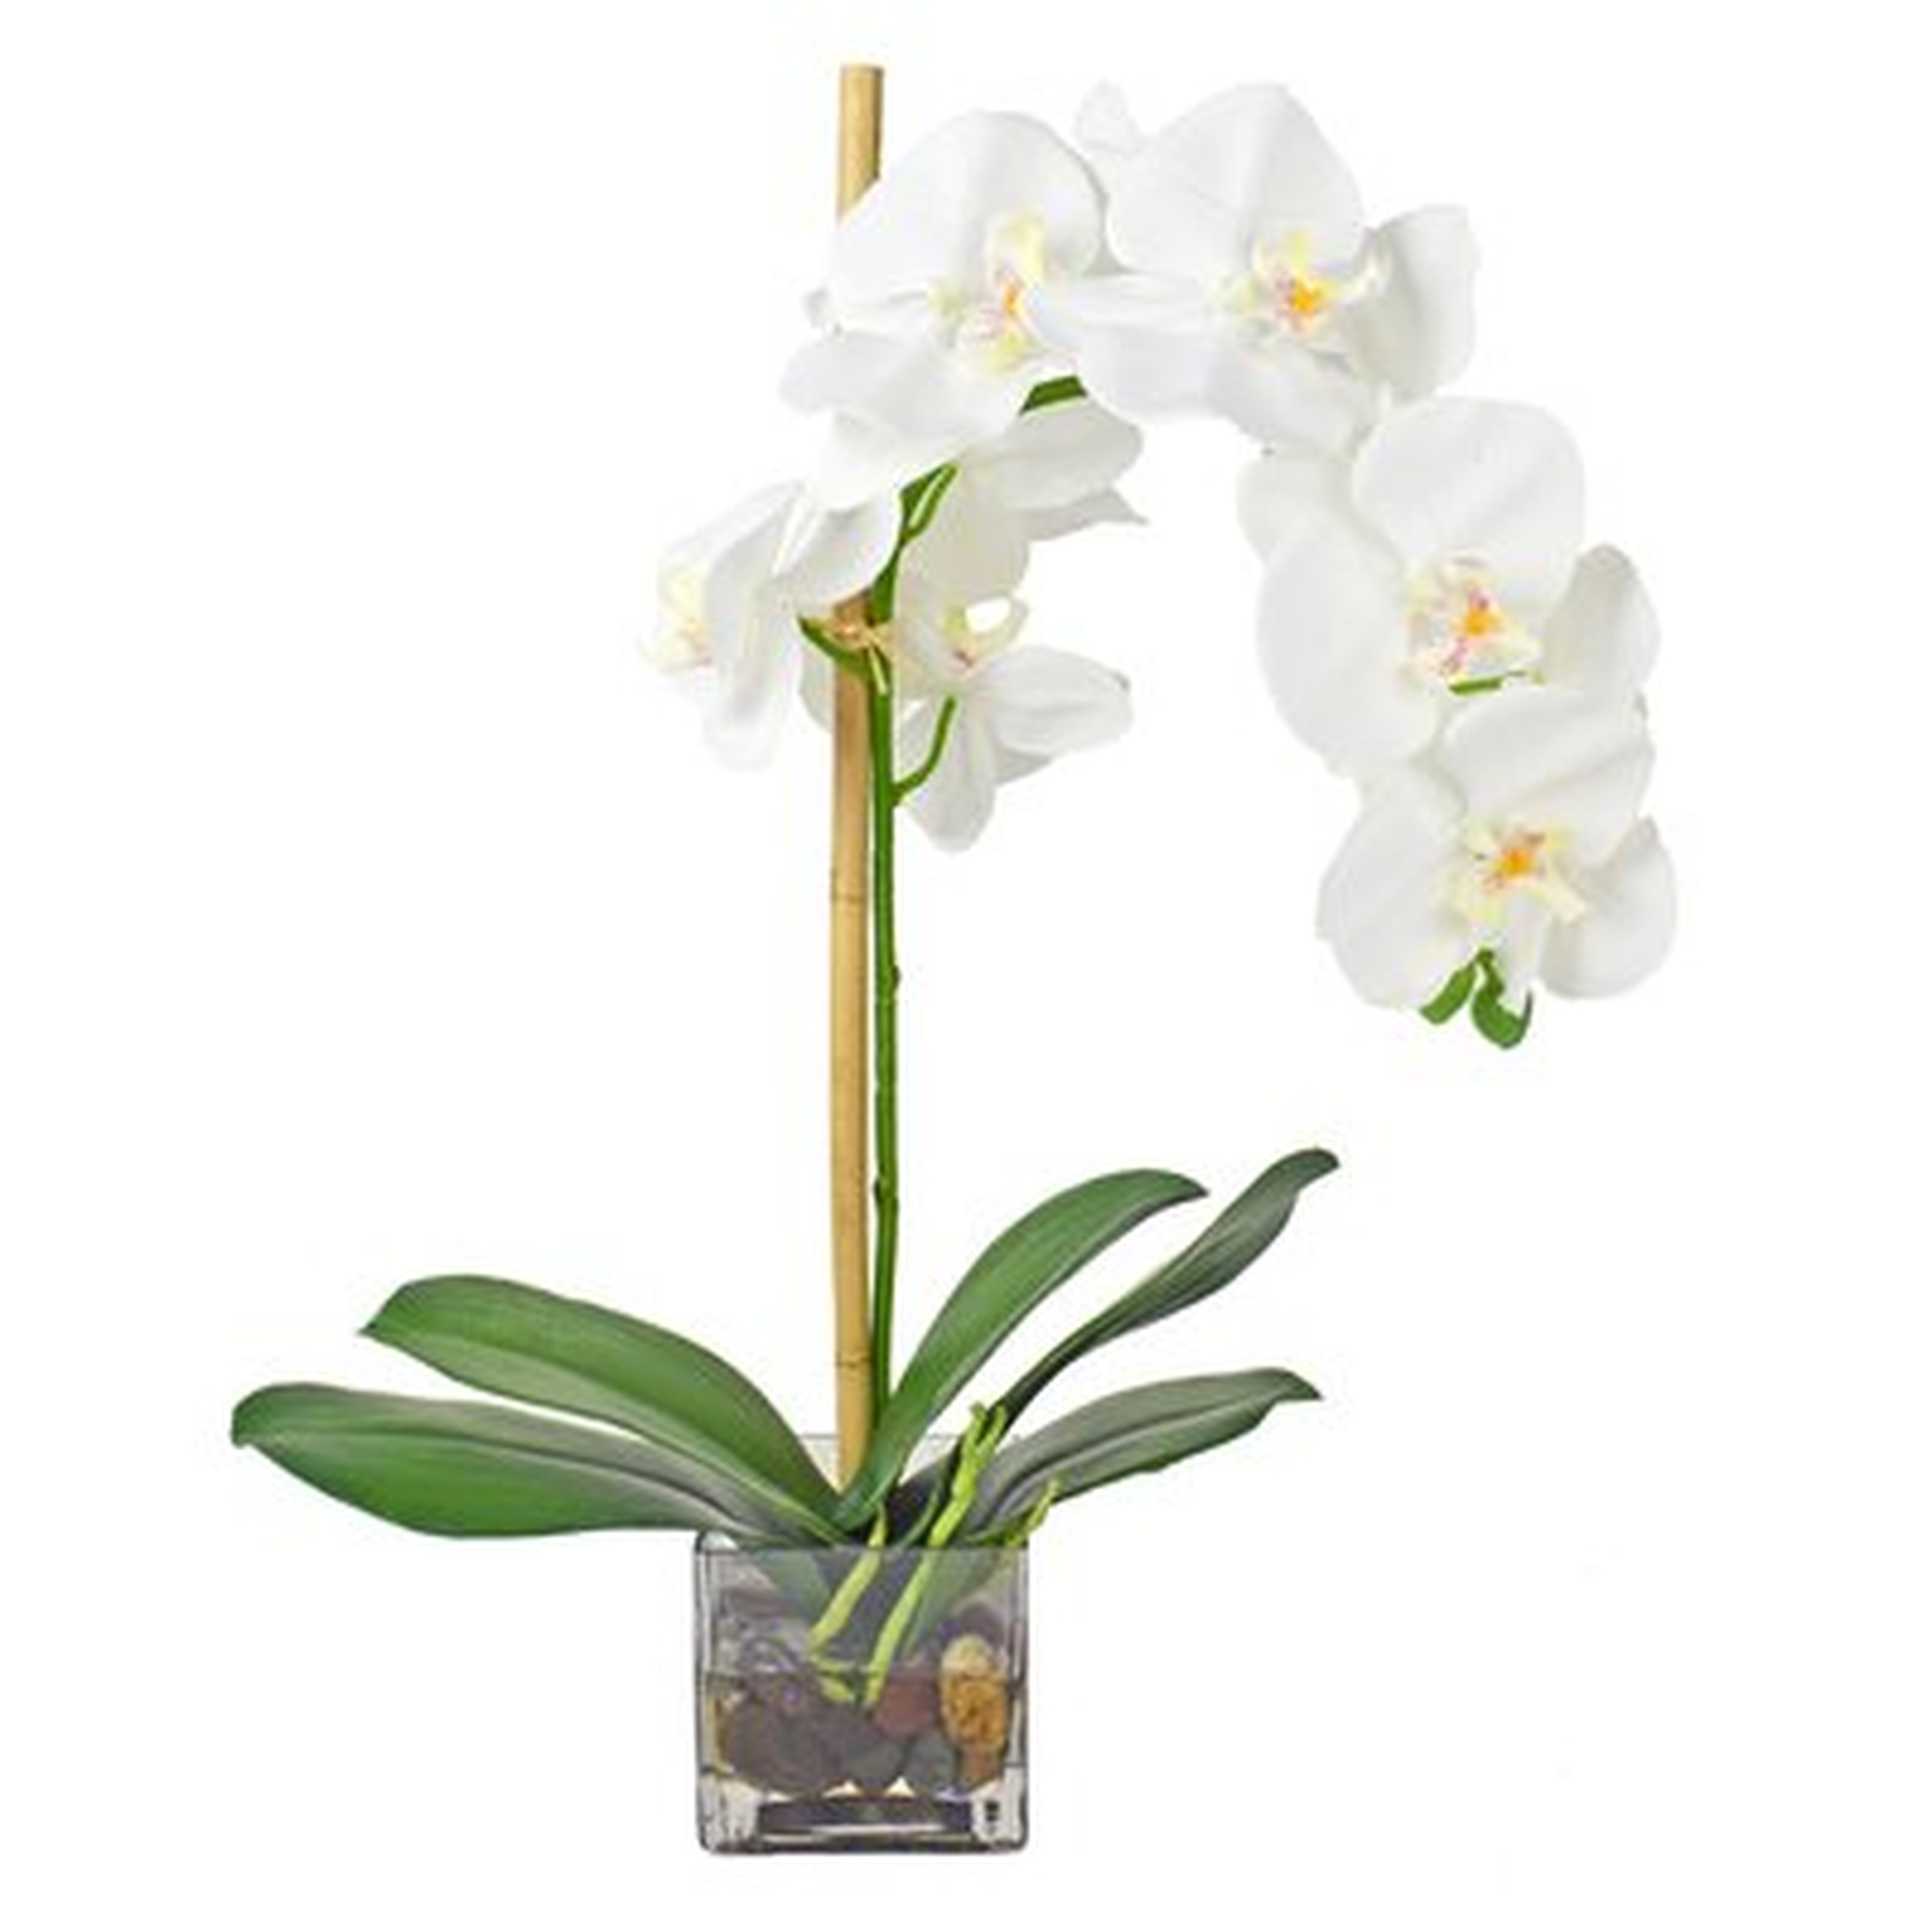 Faux Phalaenopsis Orchid Floral Arrangement in Acrylic Glass Vase - AllModern